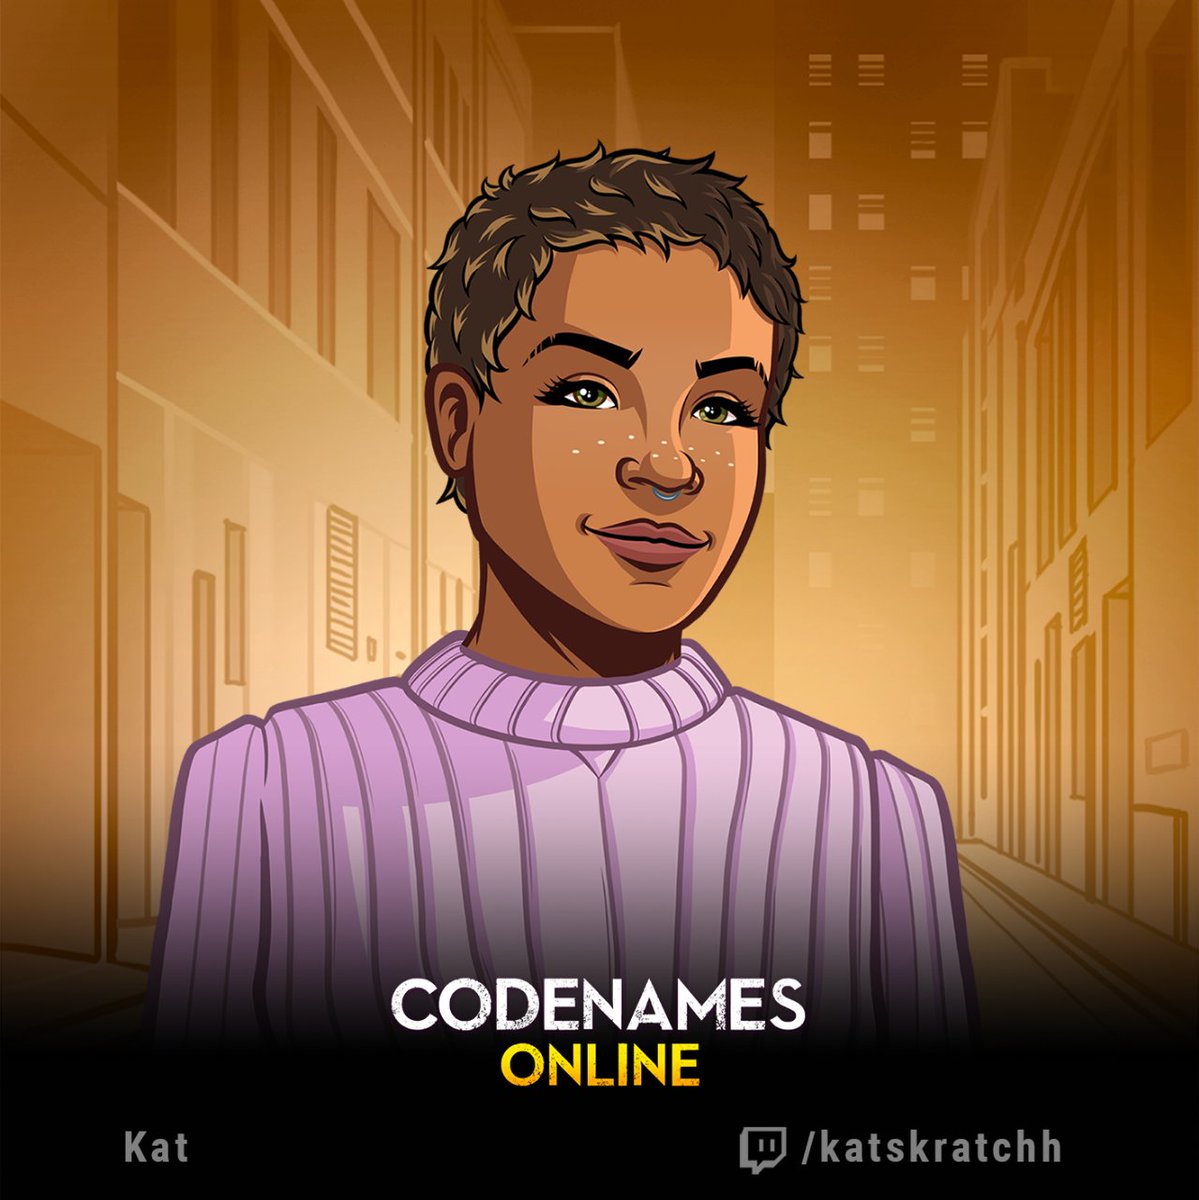 #CNcelebration

Do you enjoy cozy yet chaotic vibes? Be sure to keep an eye on @Katskratchh! Join her streams for #Codenames gameplay, exploring indie titles, and friendly community chitchats.

📺 twitch.tv/katskratchh
⏱️ Central Time